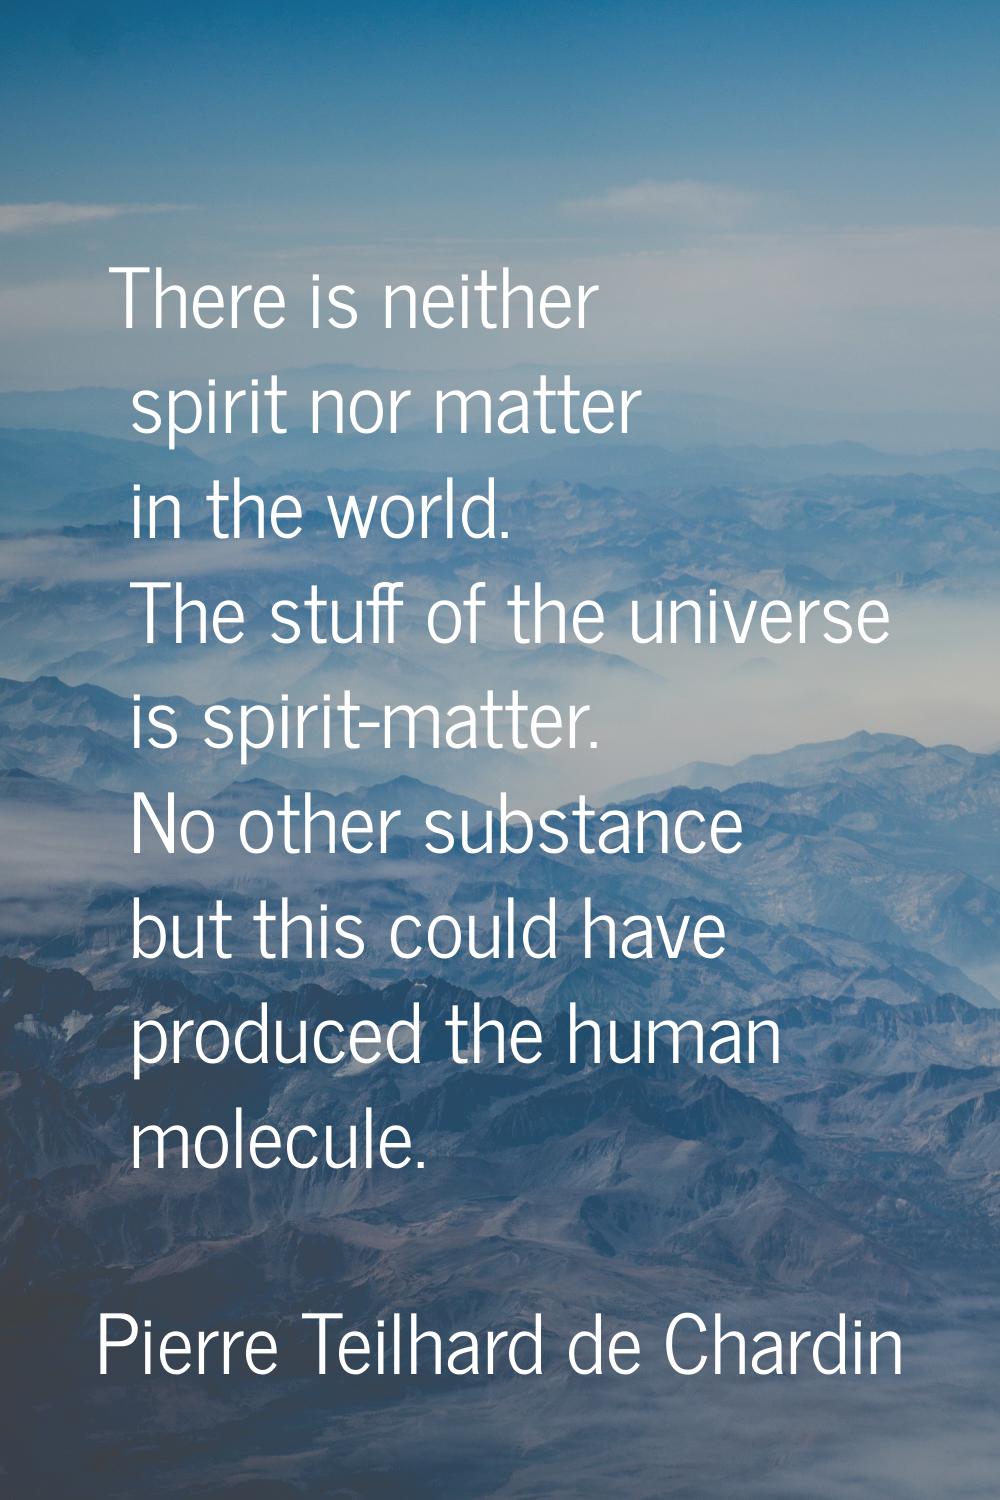 There is neither spirit nor matter in the world. The stuff of the universe is spirit-matter. No oth